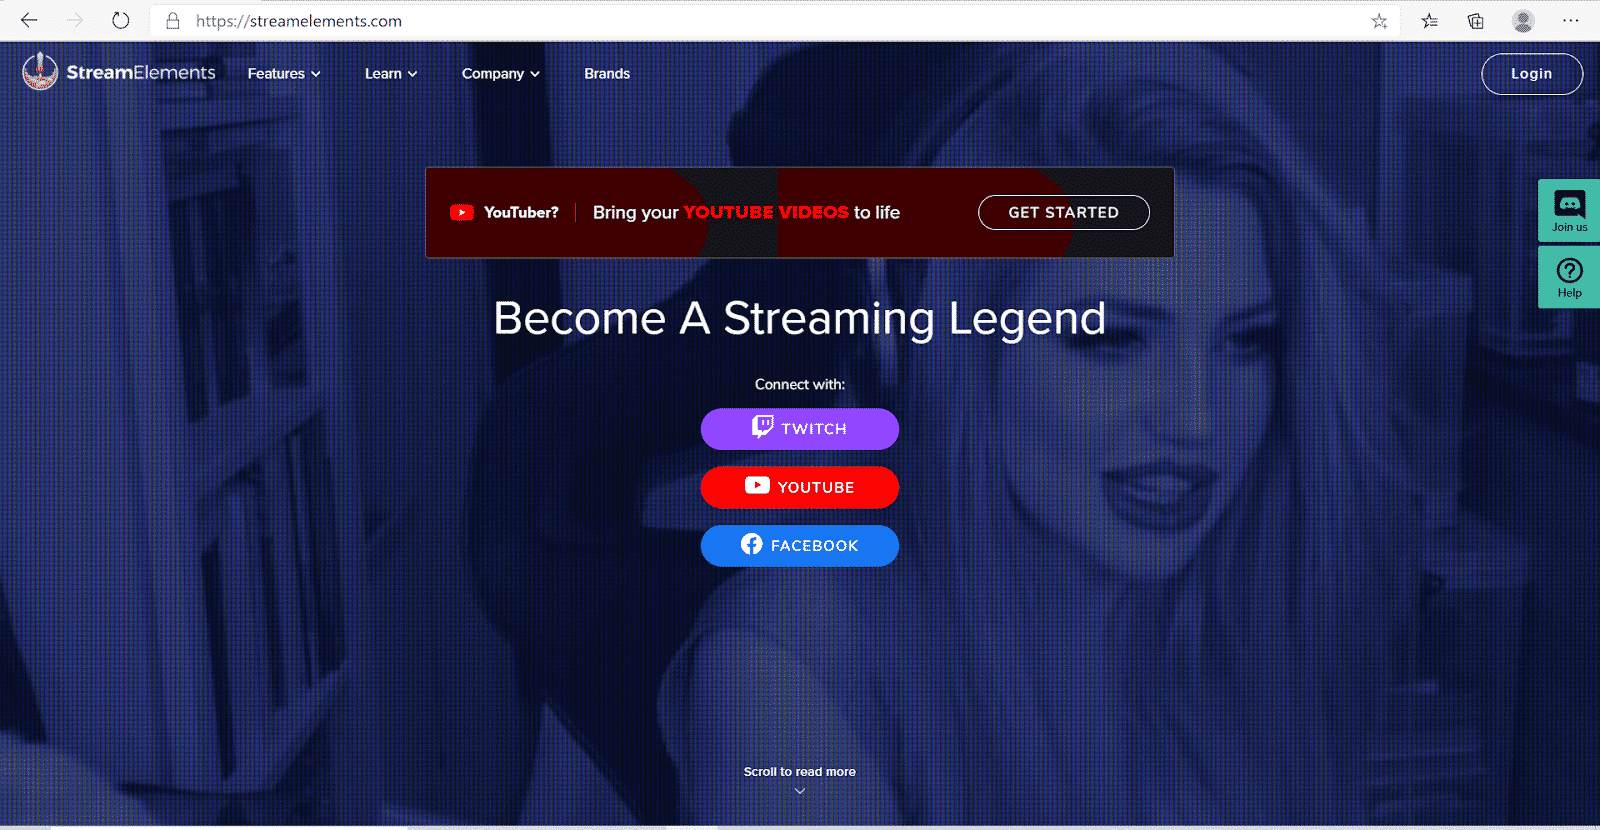 How To Use StreamElements - StreamScheme